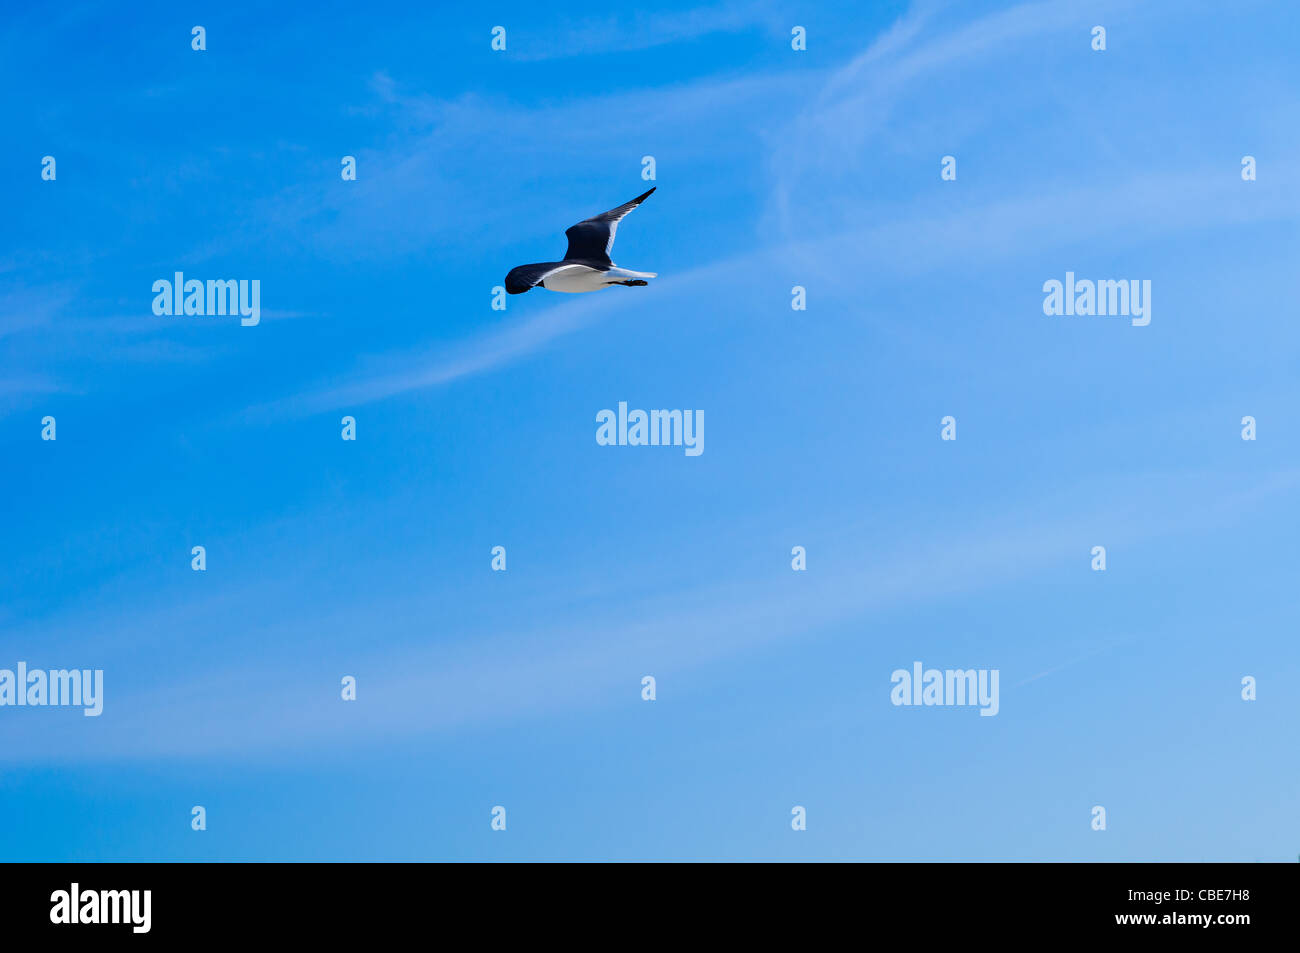 Sea gull flying in blue sky with clouds Stock Photo